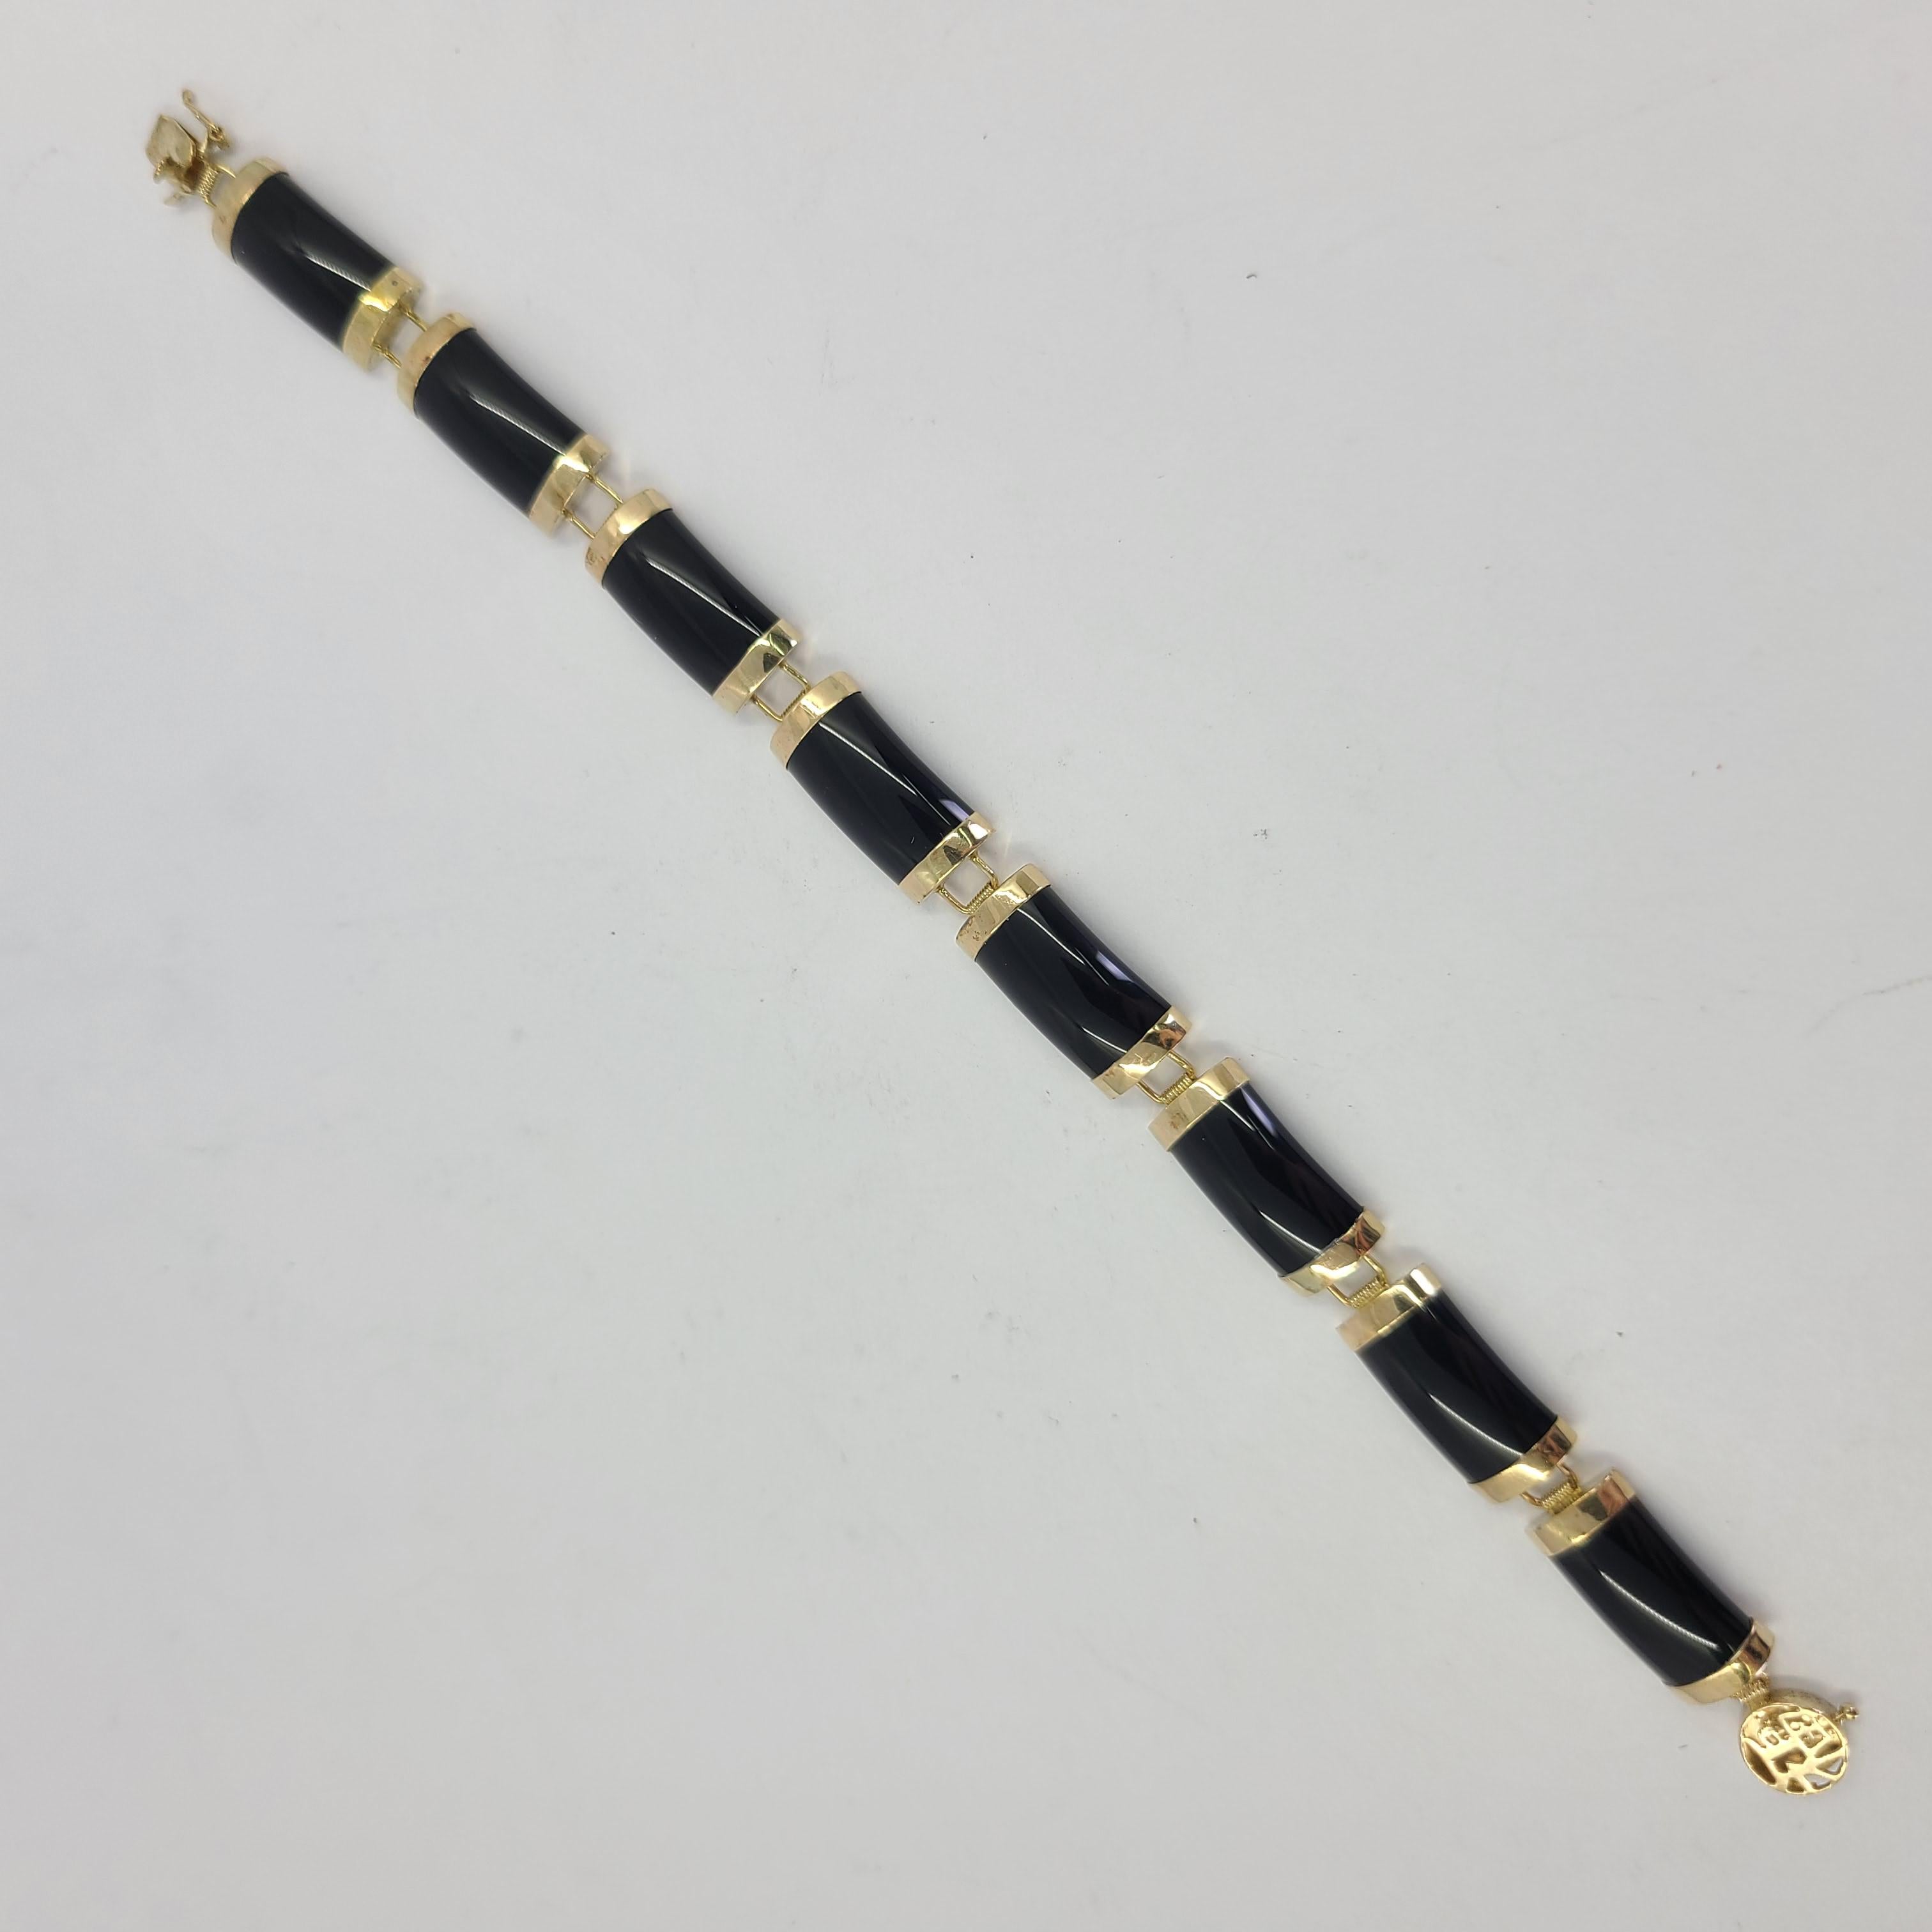 10 Karat Yellow Gold & Onyx Bracelet Measuring 6 Inches Long. Asian Symbol On Clasp With Figure 8 Safety. Finished Weight Is 9.0 Grams. 